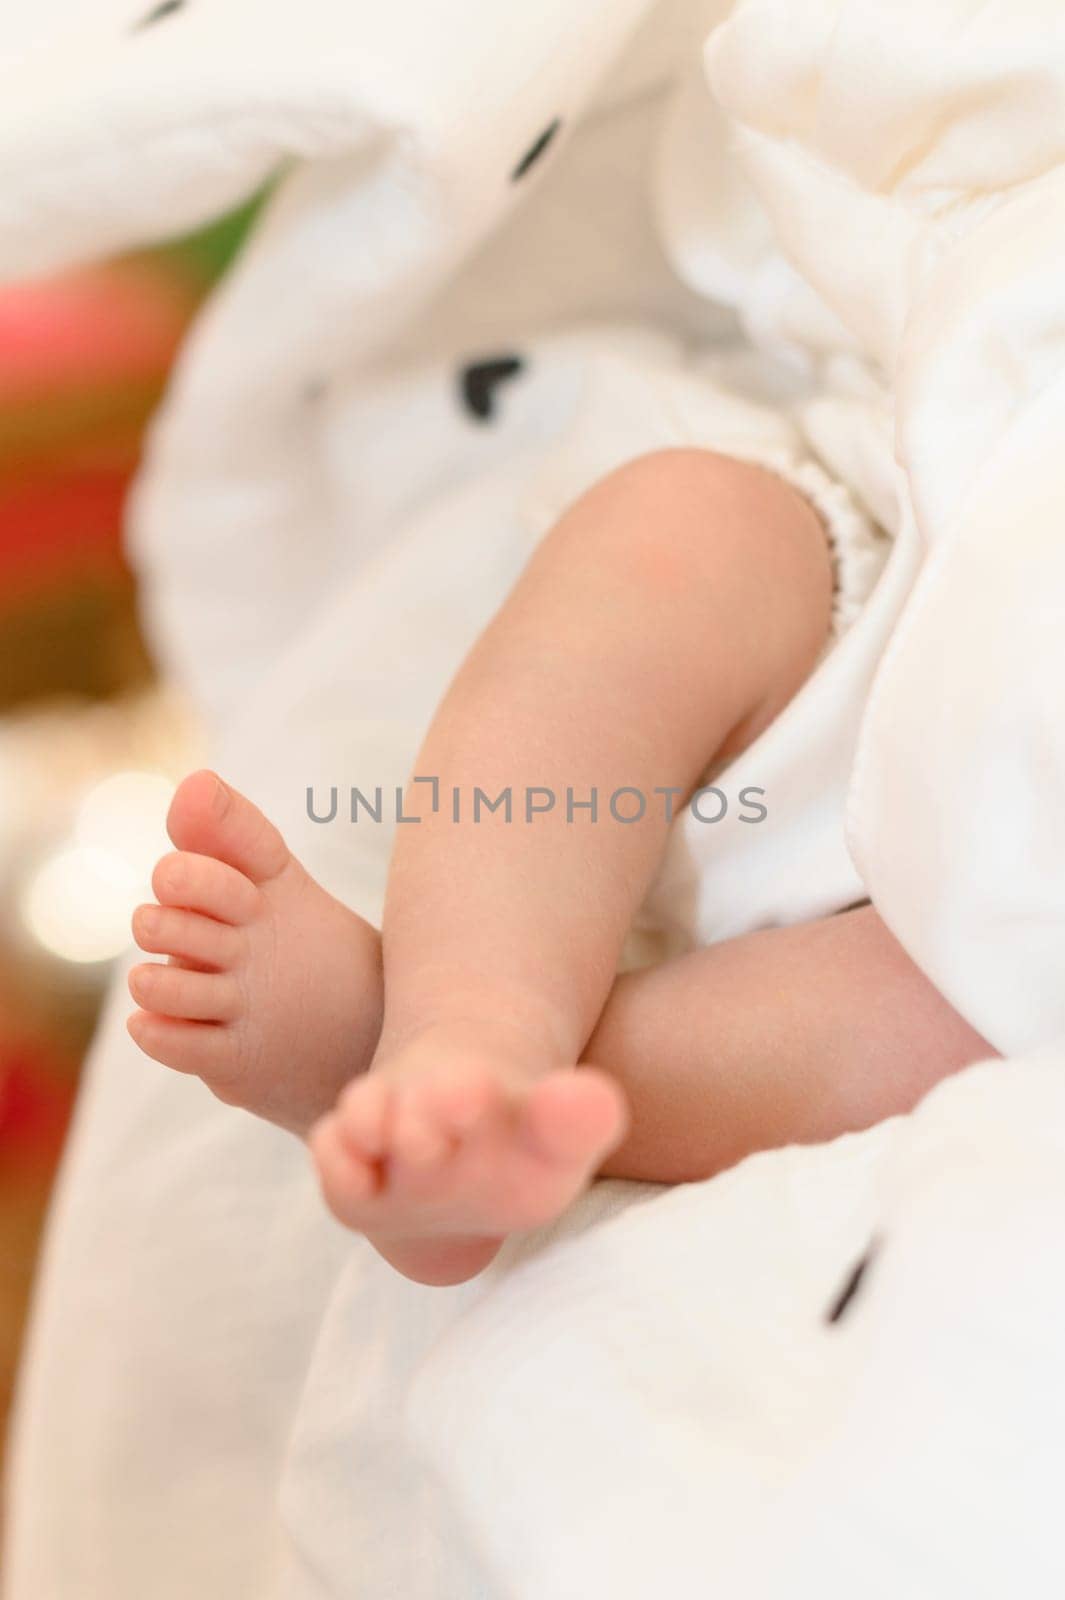 A baby's small leg during baptism on a white sheet. by Niko_Cingaryuk